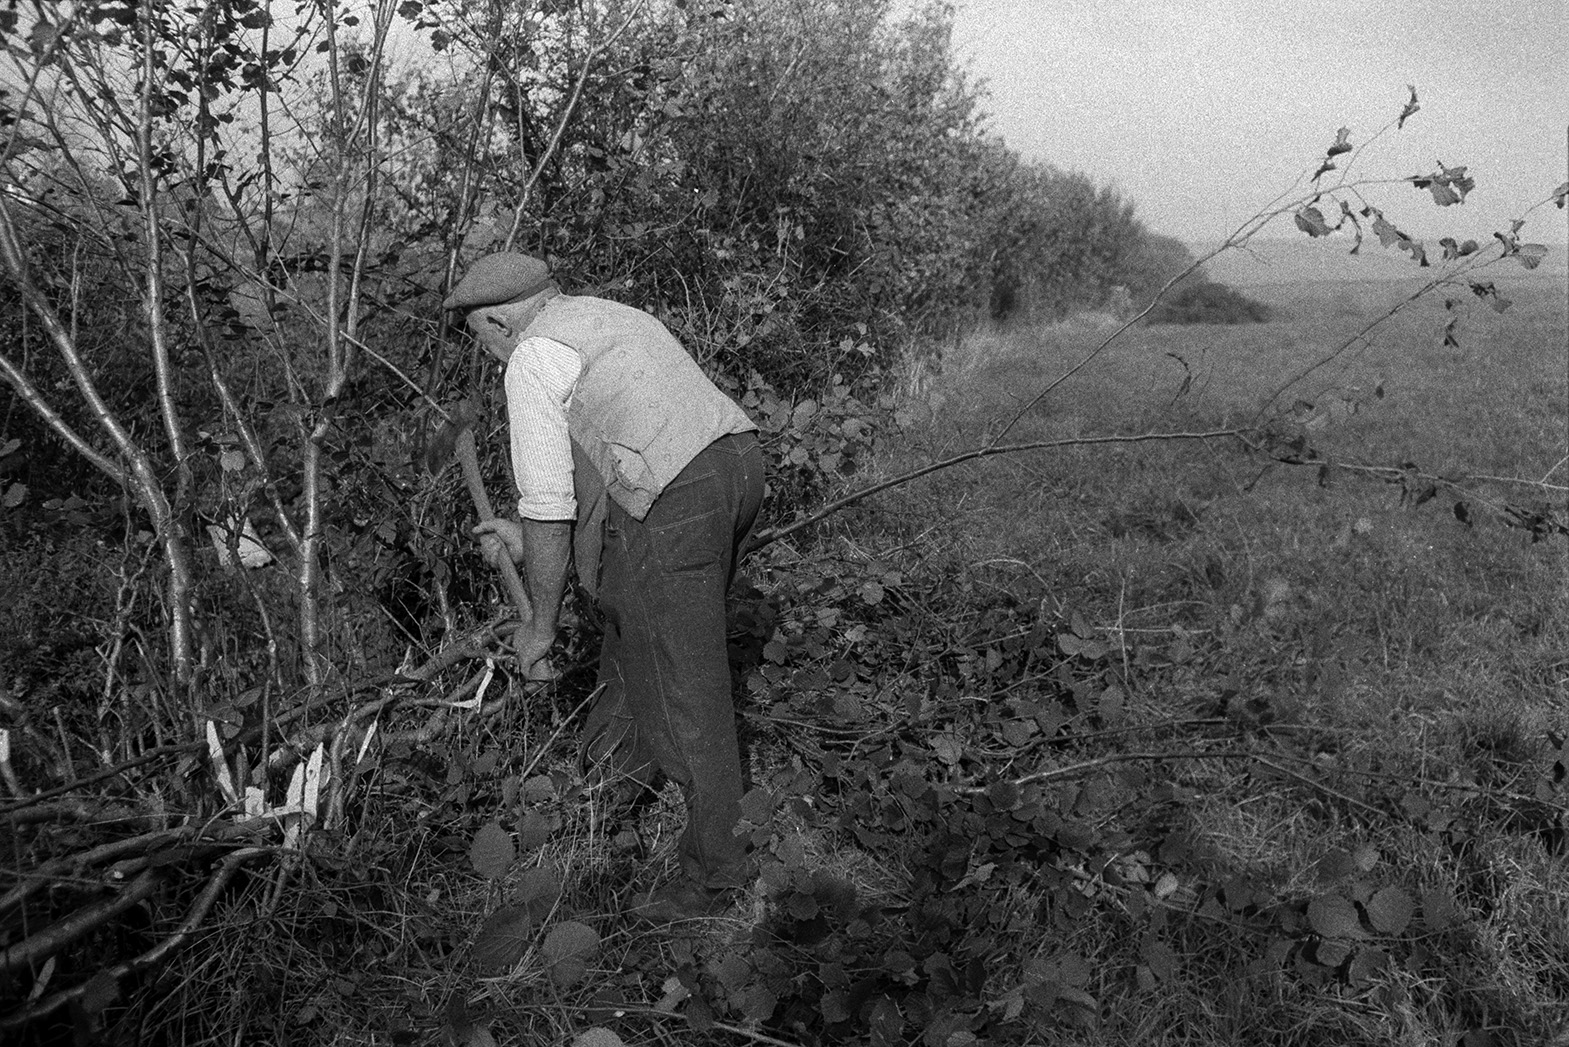 Tom Hooper laying a hedge in a field at Beaford. He is using an axe to cut the branches.